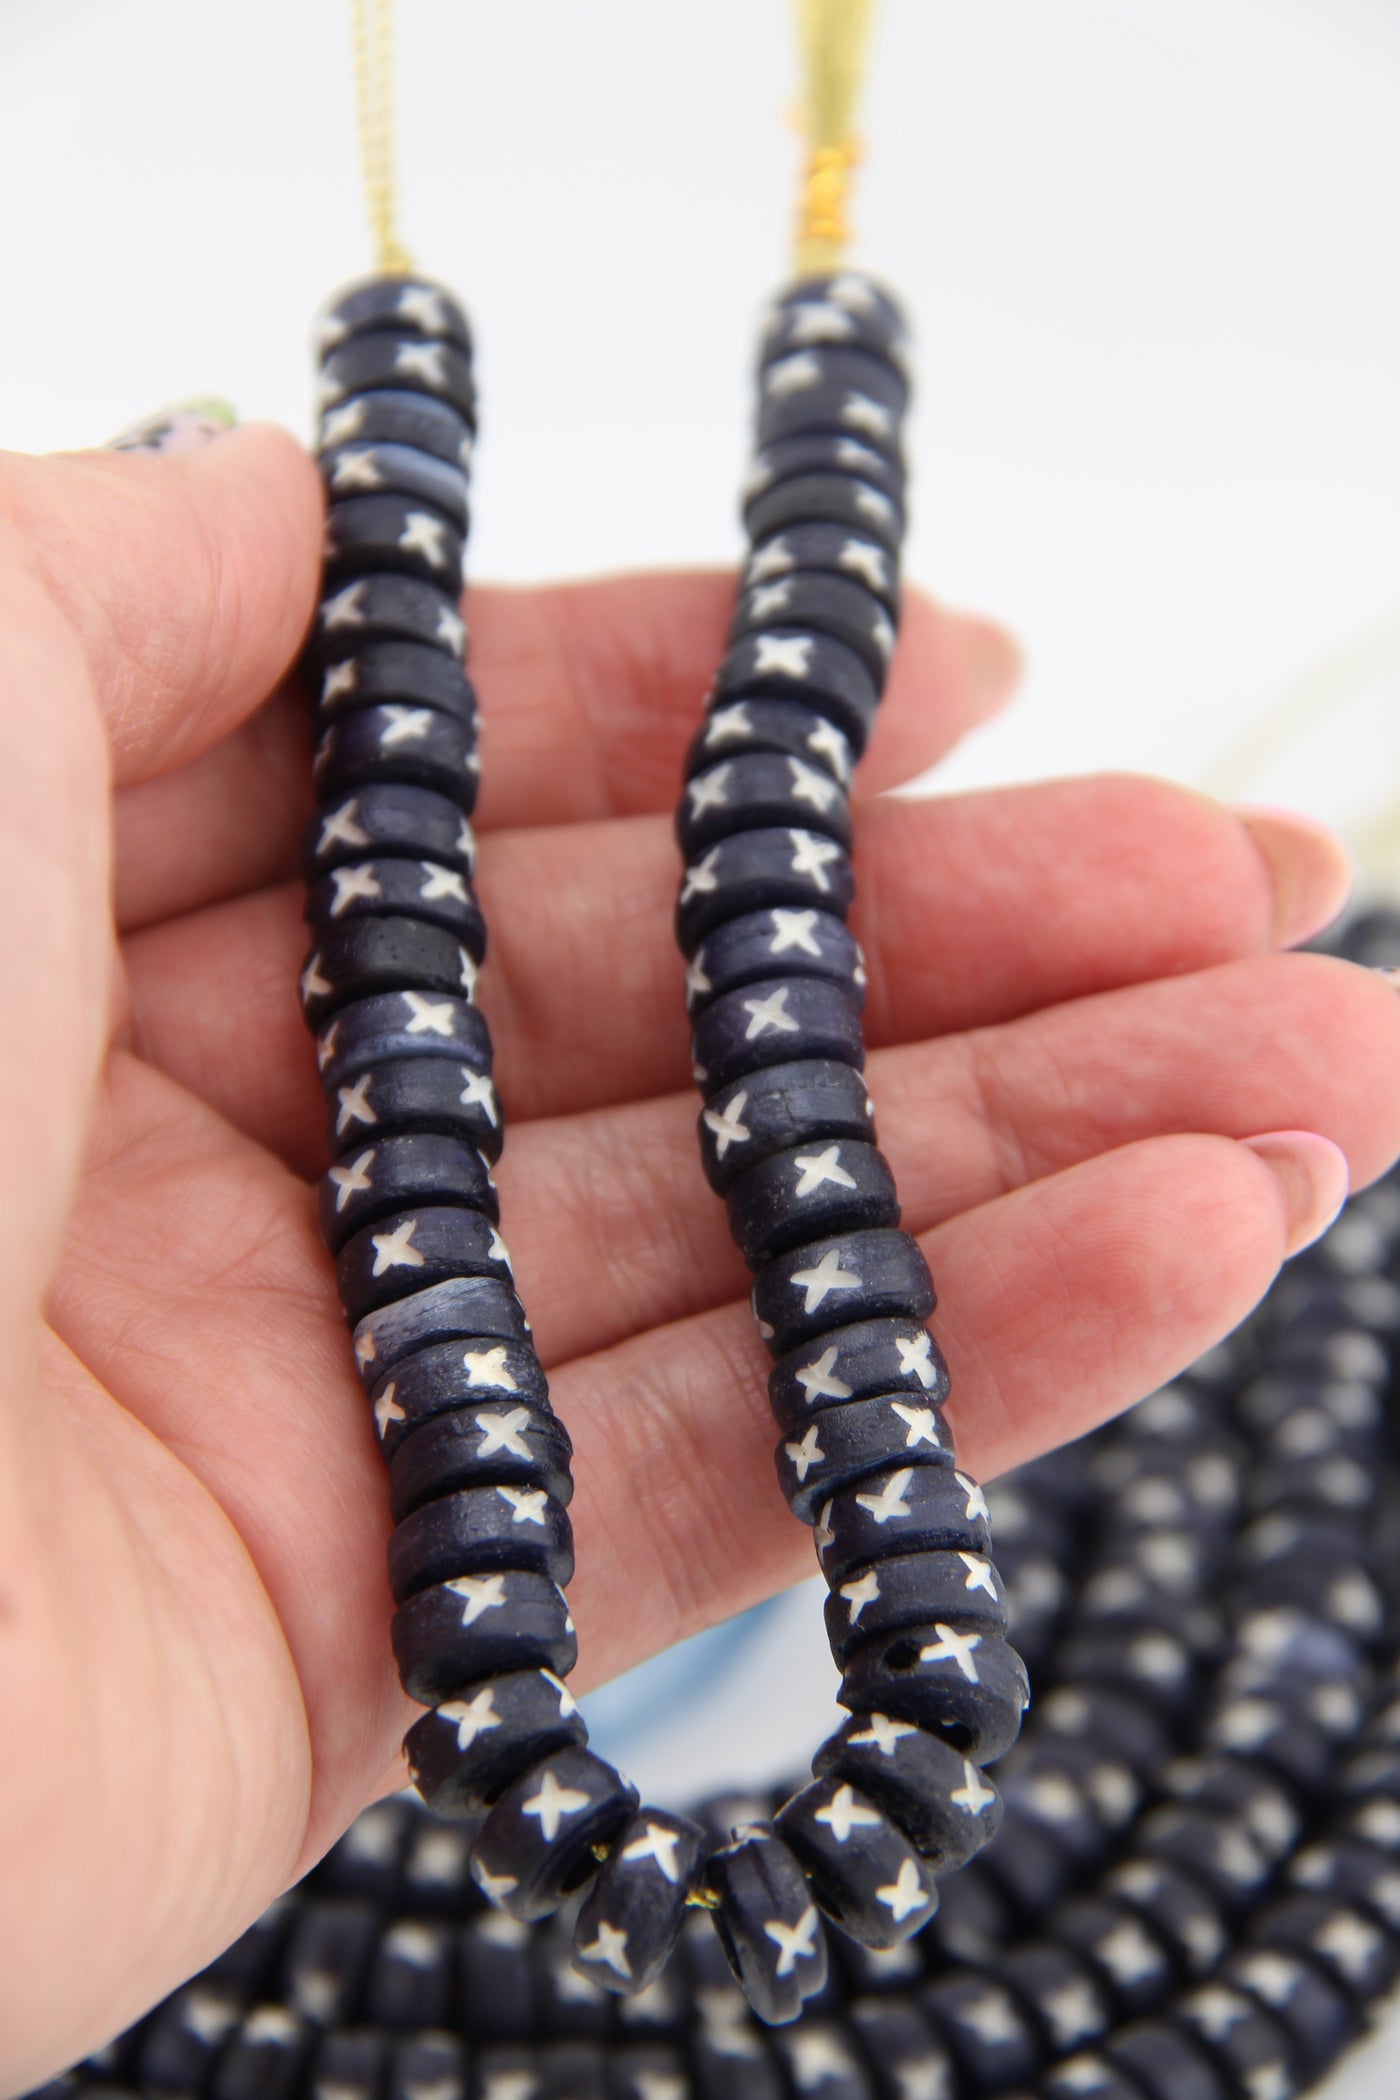 Indigo Blue & White Carved Tribal Disc Bone Beads: 10x5mm, 45 pieces Made in India, from buffalo bone (cruelty-free) that has been carved with a tribal "X"